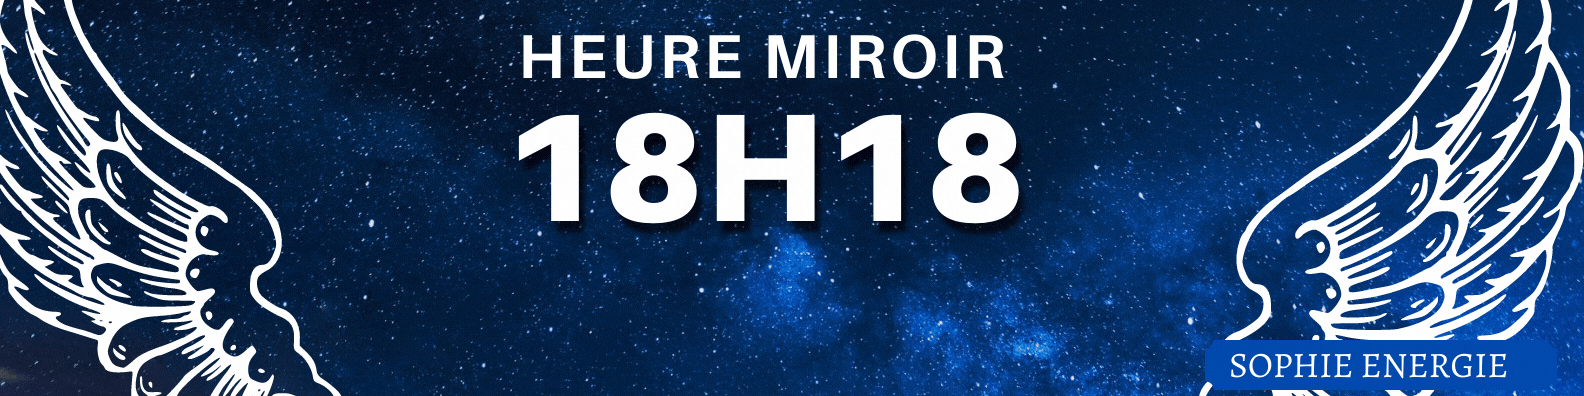 HEURE MIROIR anges 18h18